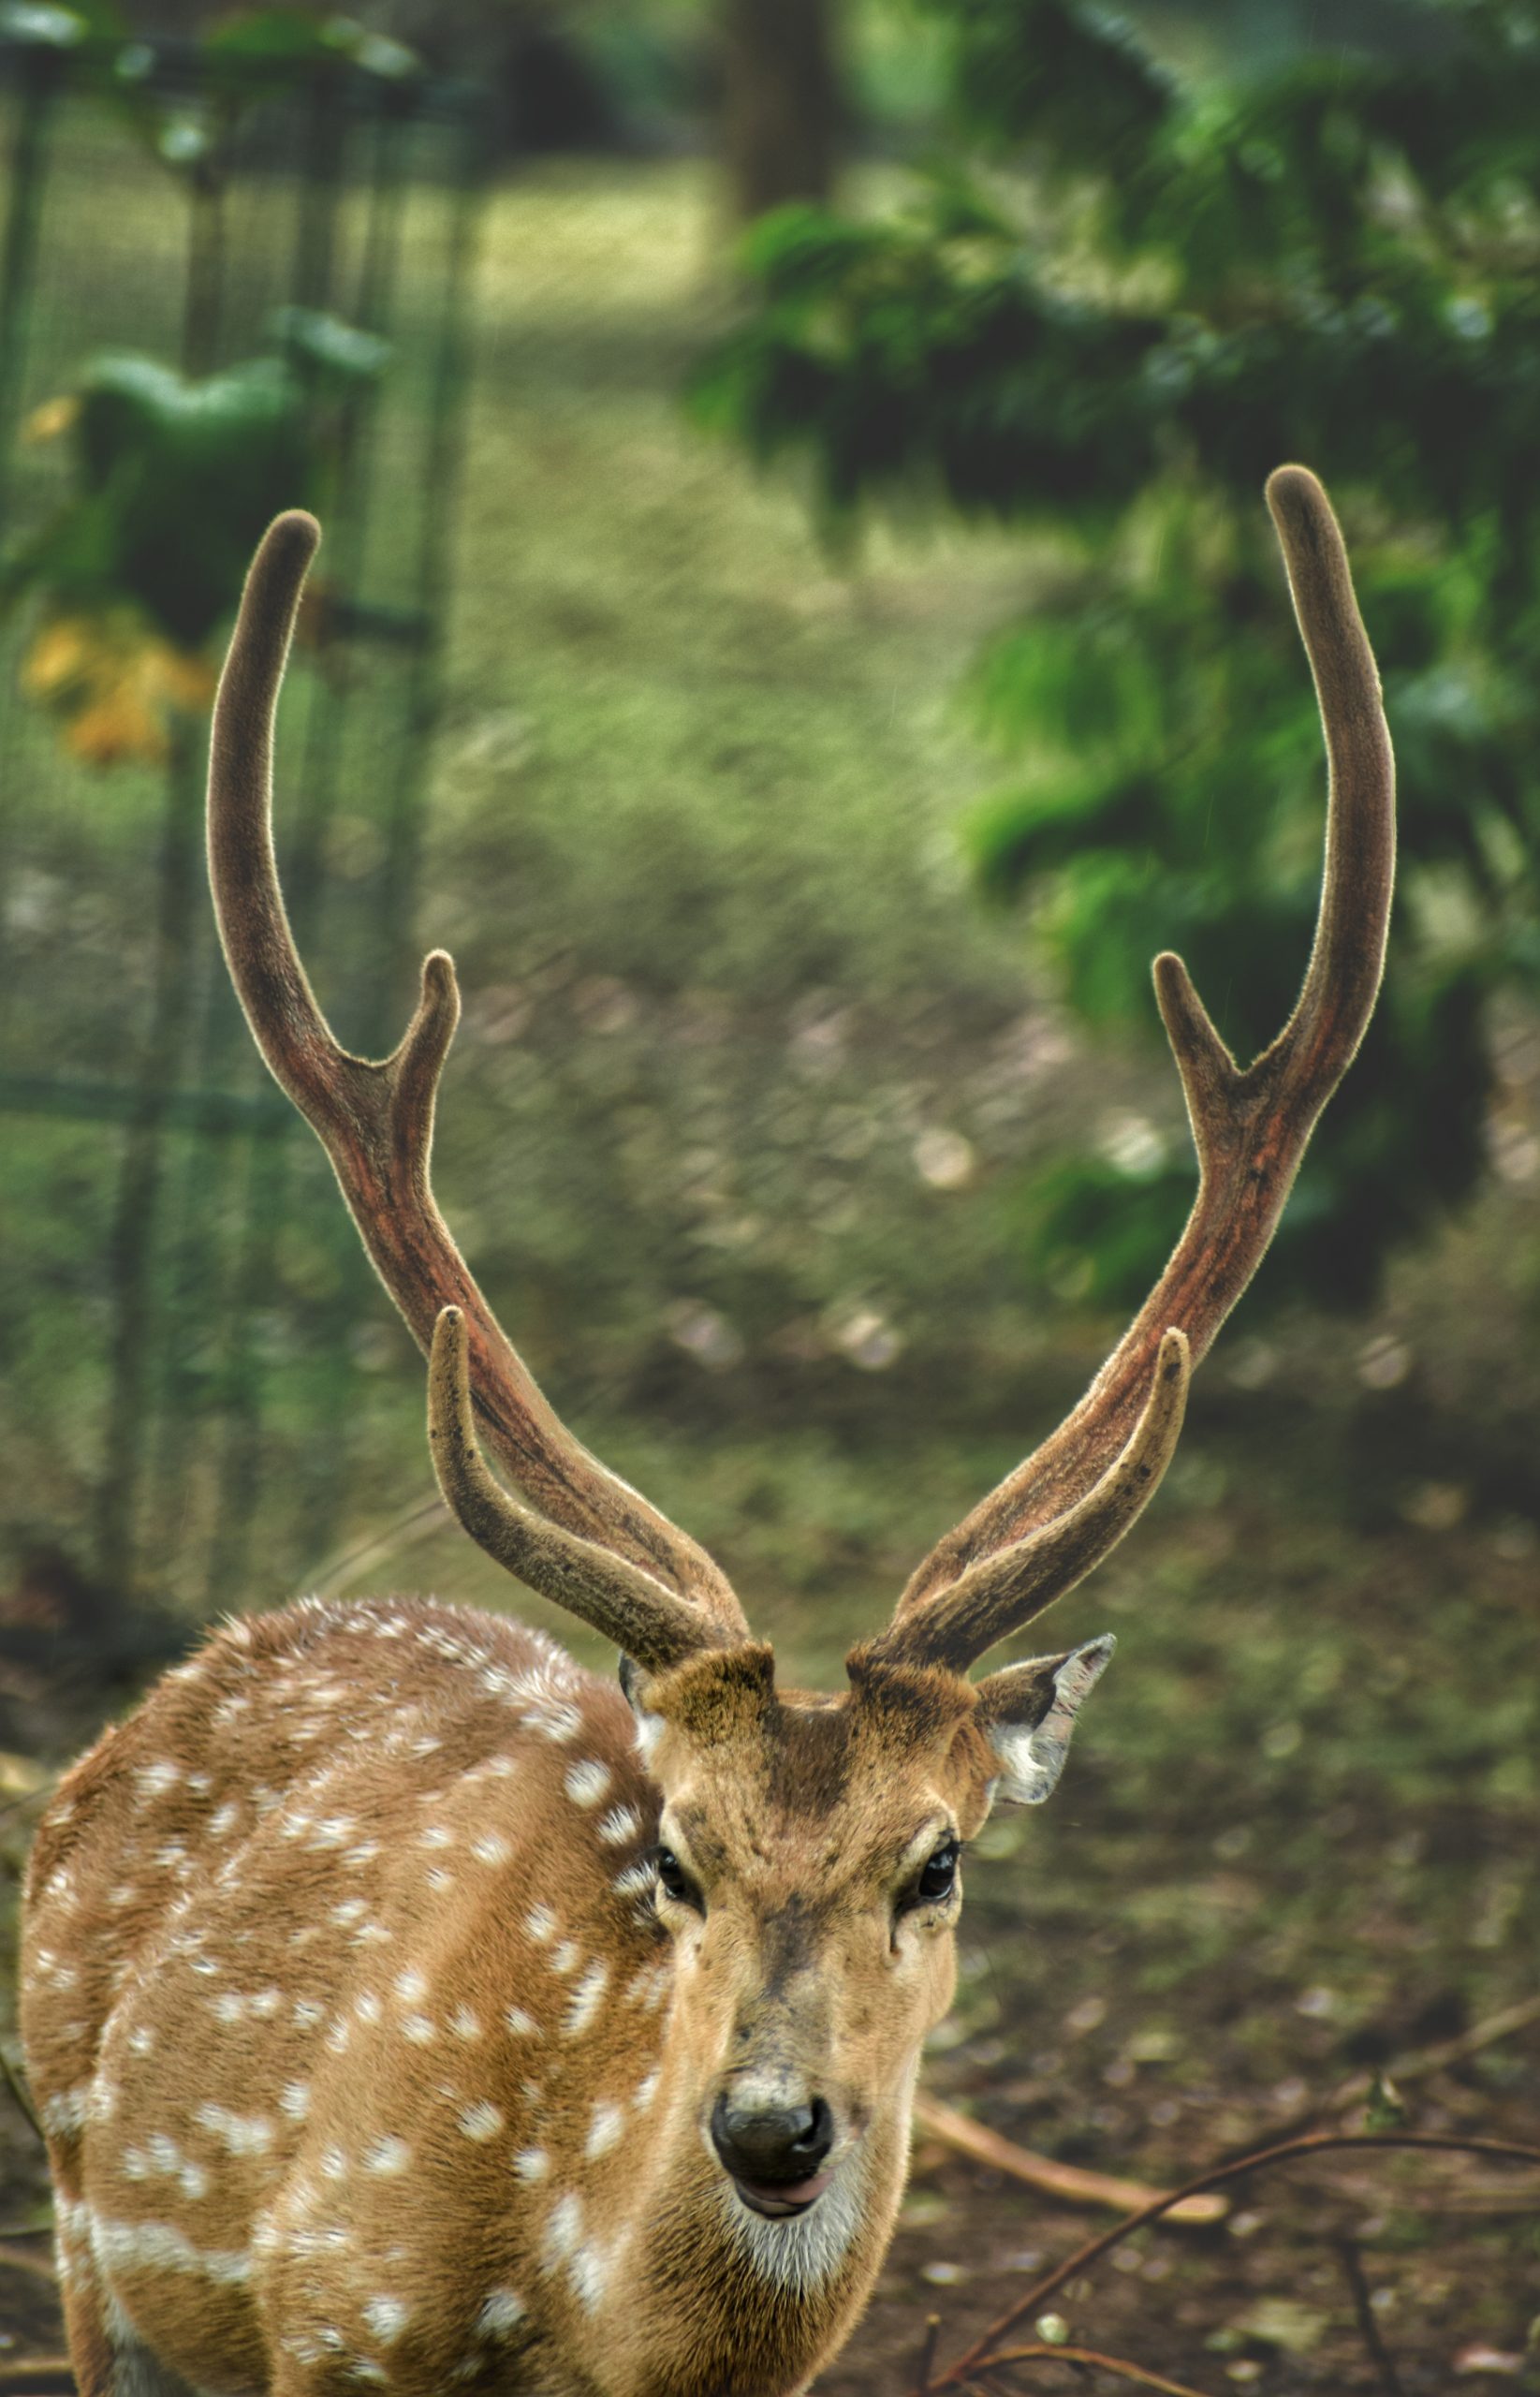 The Chital